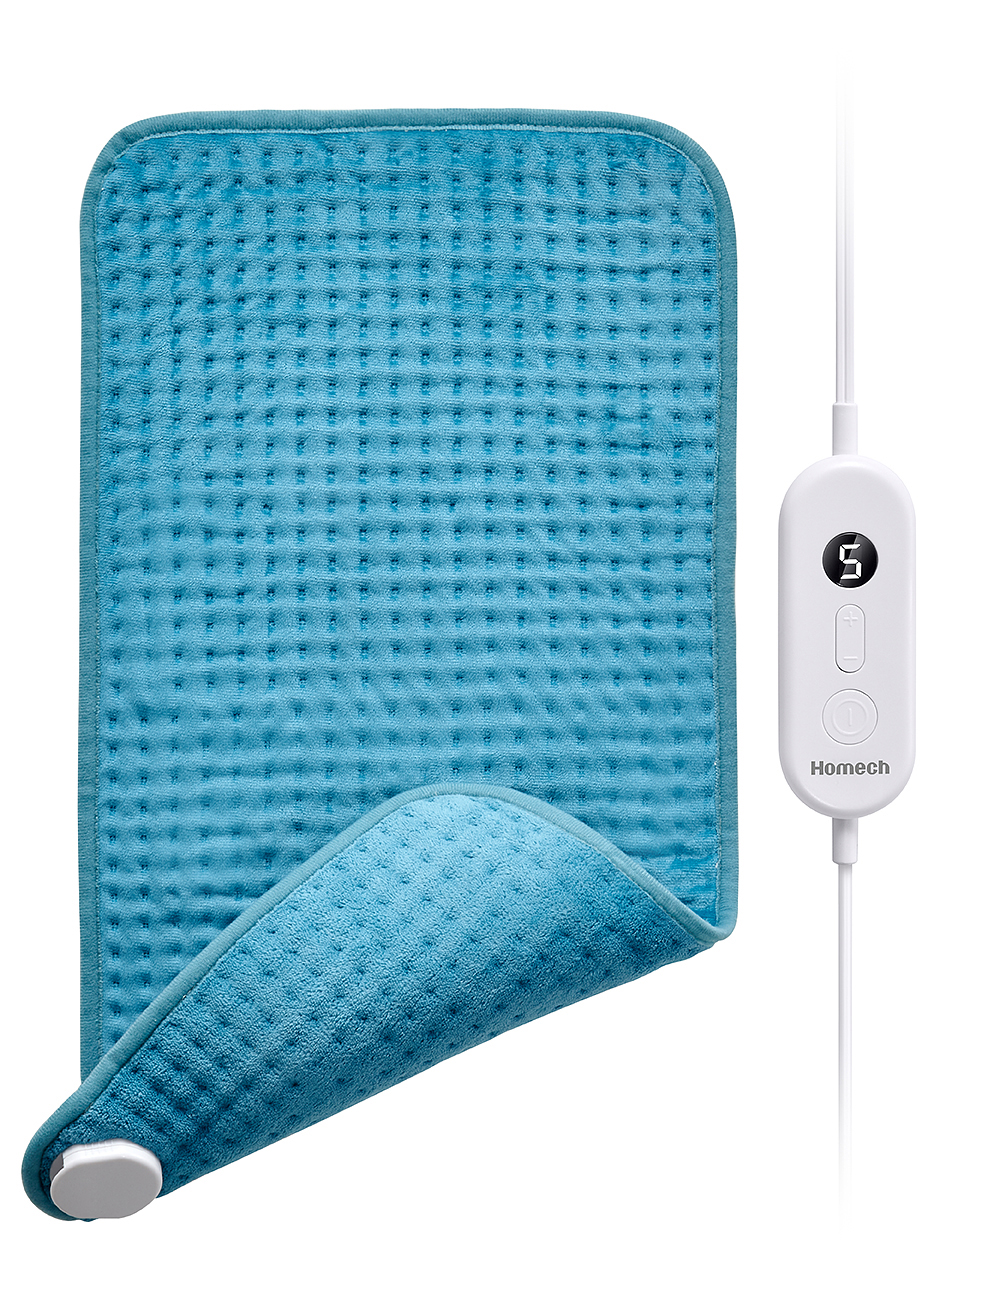 HOMECH Electric Heating Pad for Back Fatigue, Knee Fatigue and Cramps Relief Fatigue, 12"x24", FSA Eligible, Blue - image 3 of 9